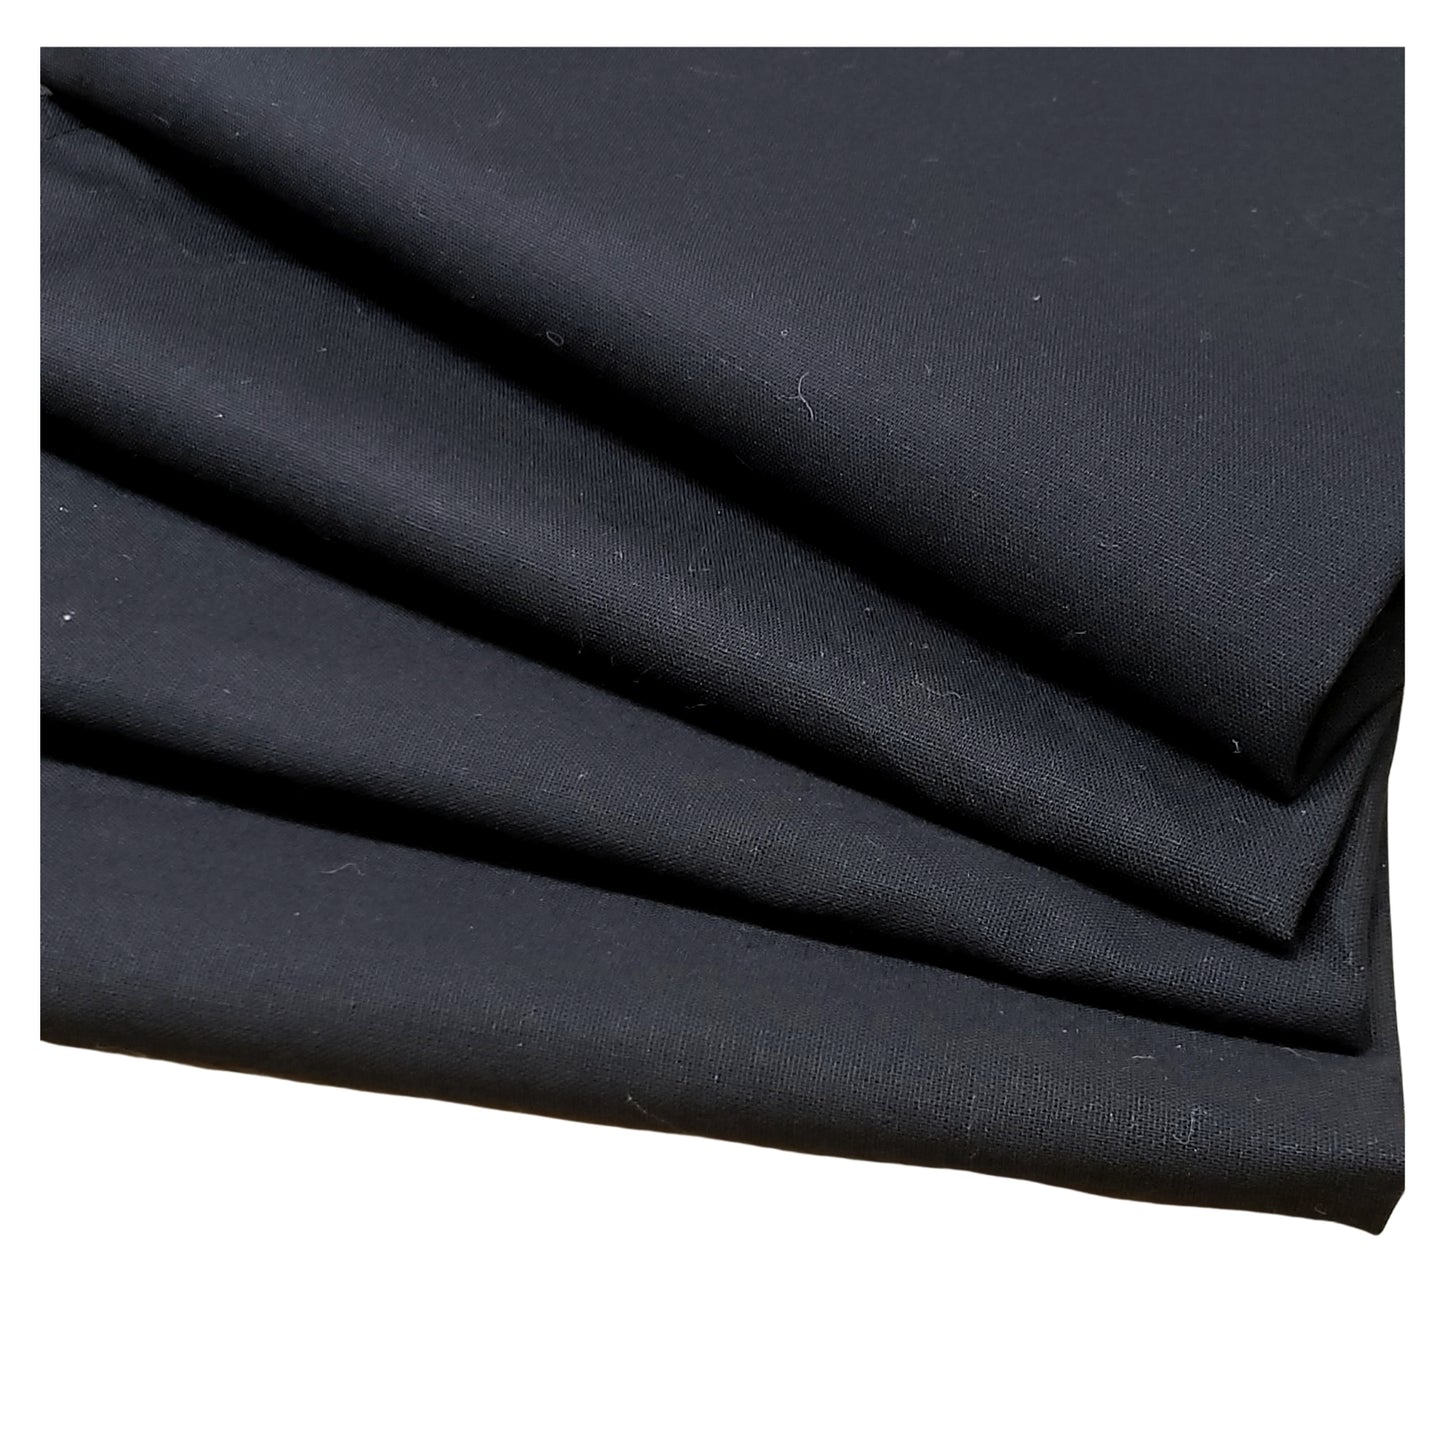 Charlo's Set of 4 100% Black Solid Cotton Cloth Napkins 15" by 15" Washable Reusable